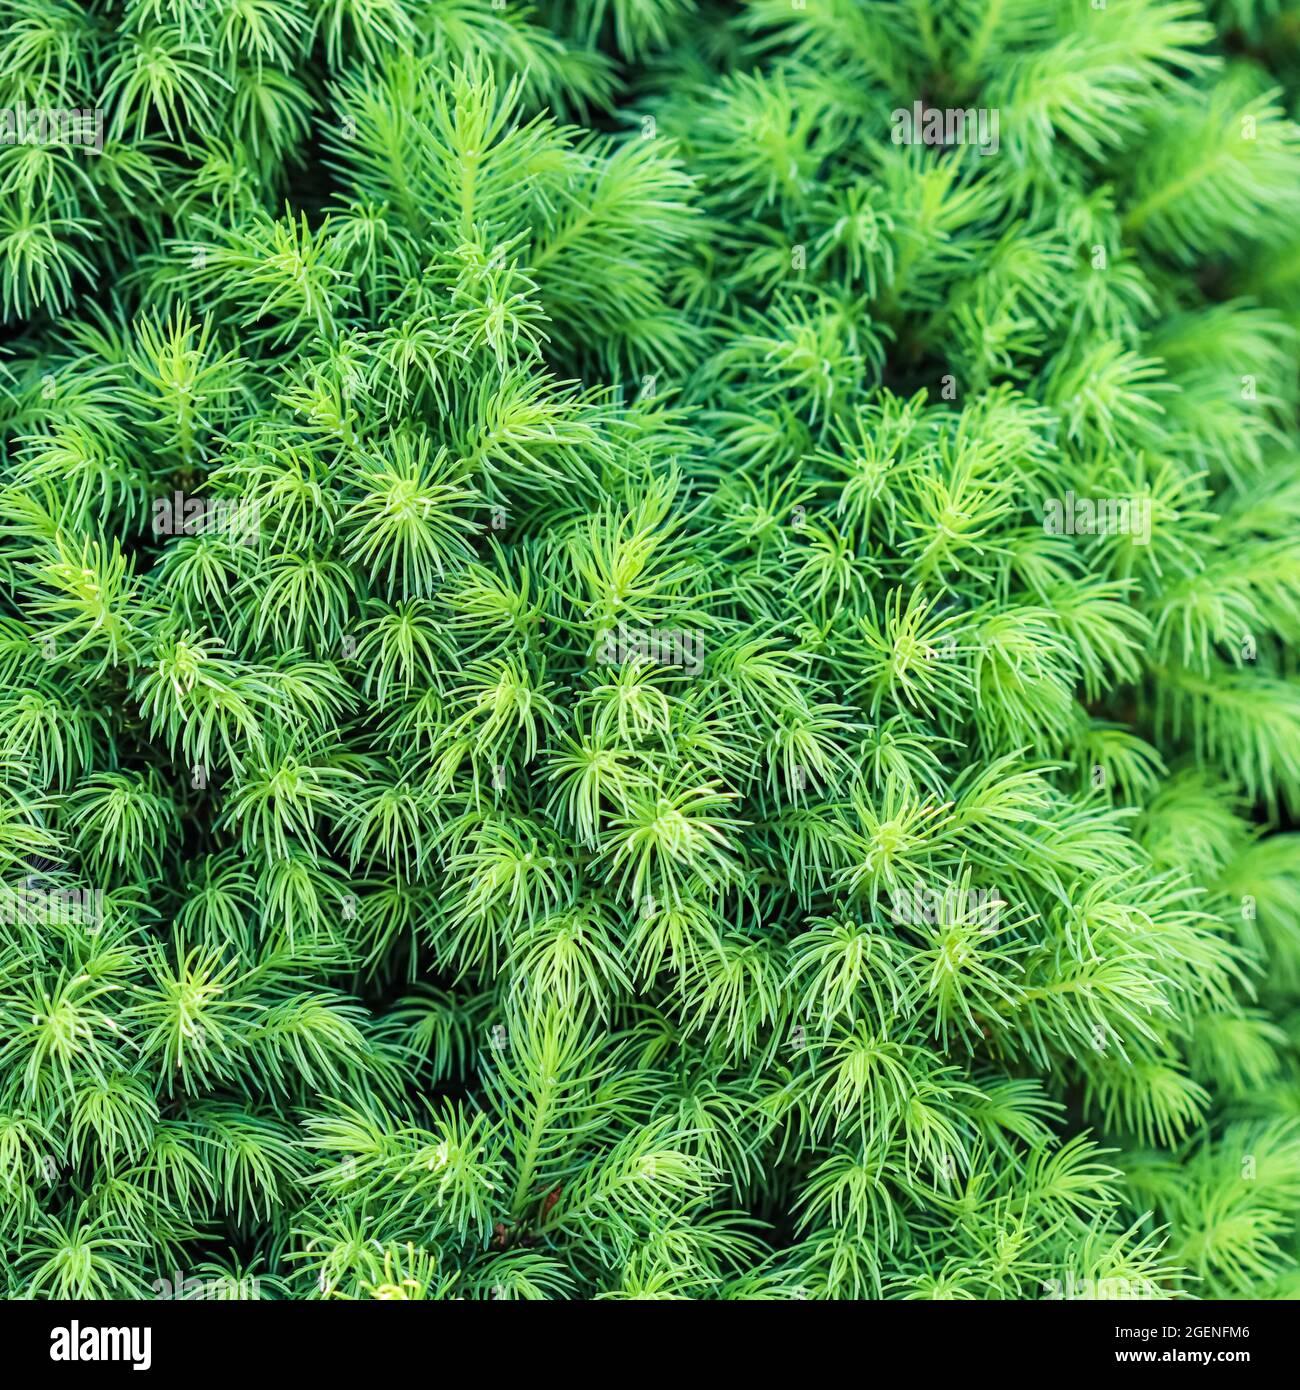 Texture, background, pattern of green sprouts of decorative coniferous evergreen Canadian Picea glauca Conica spruce Stock Photo